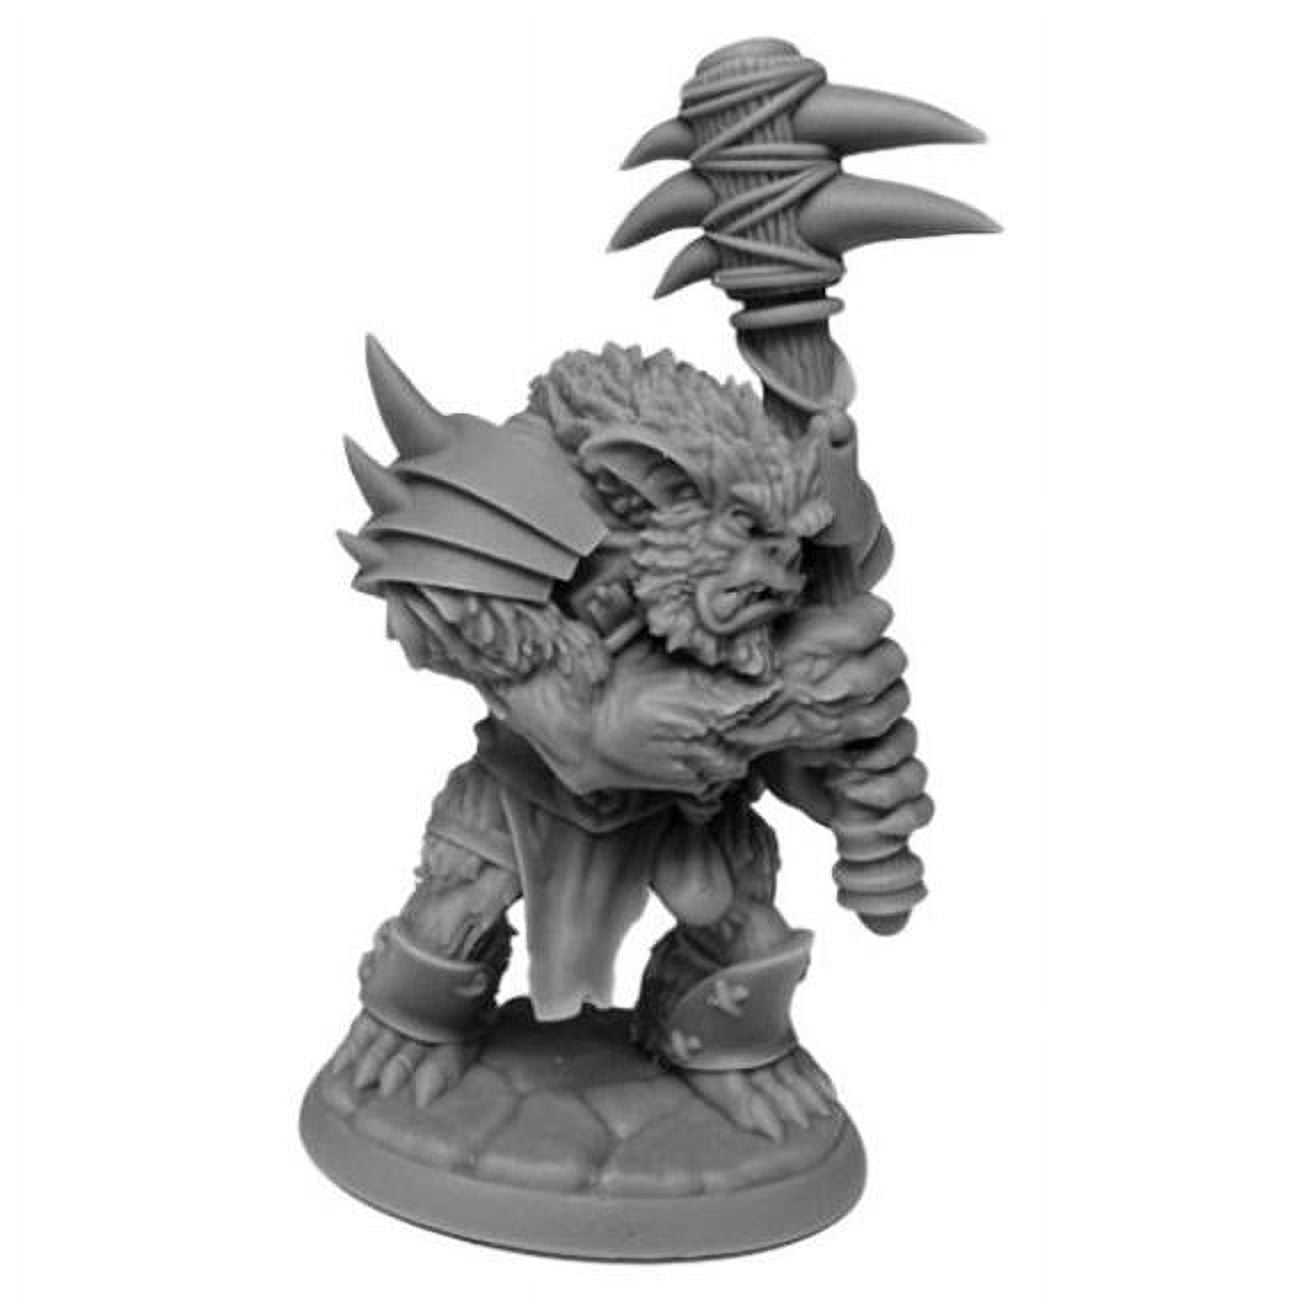 Picture of Reaper Miniatures REM07092 Dungeons & Dragons Tork Bloodclub Bugbear Miniature